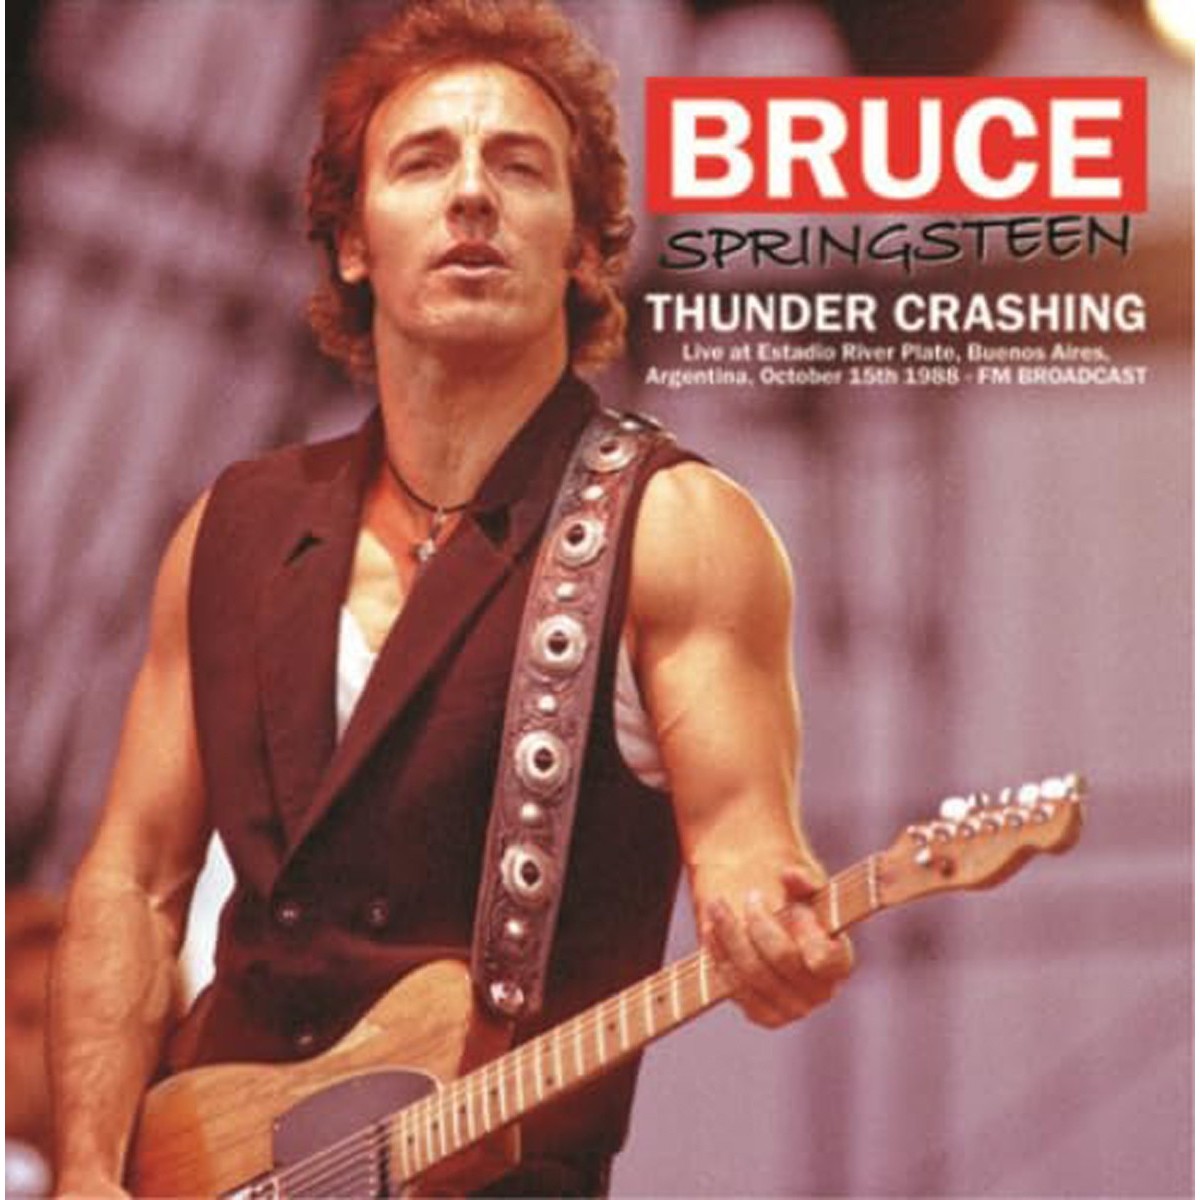 Bruce Springsteen - Live At Estadio River Plate Buenos Aires